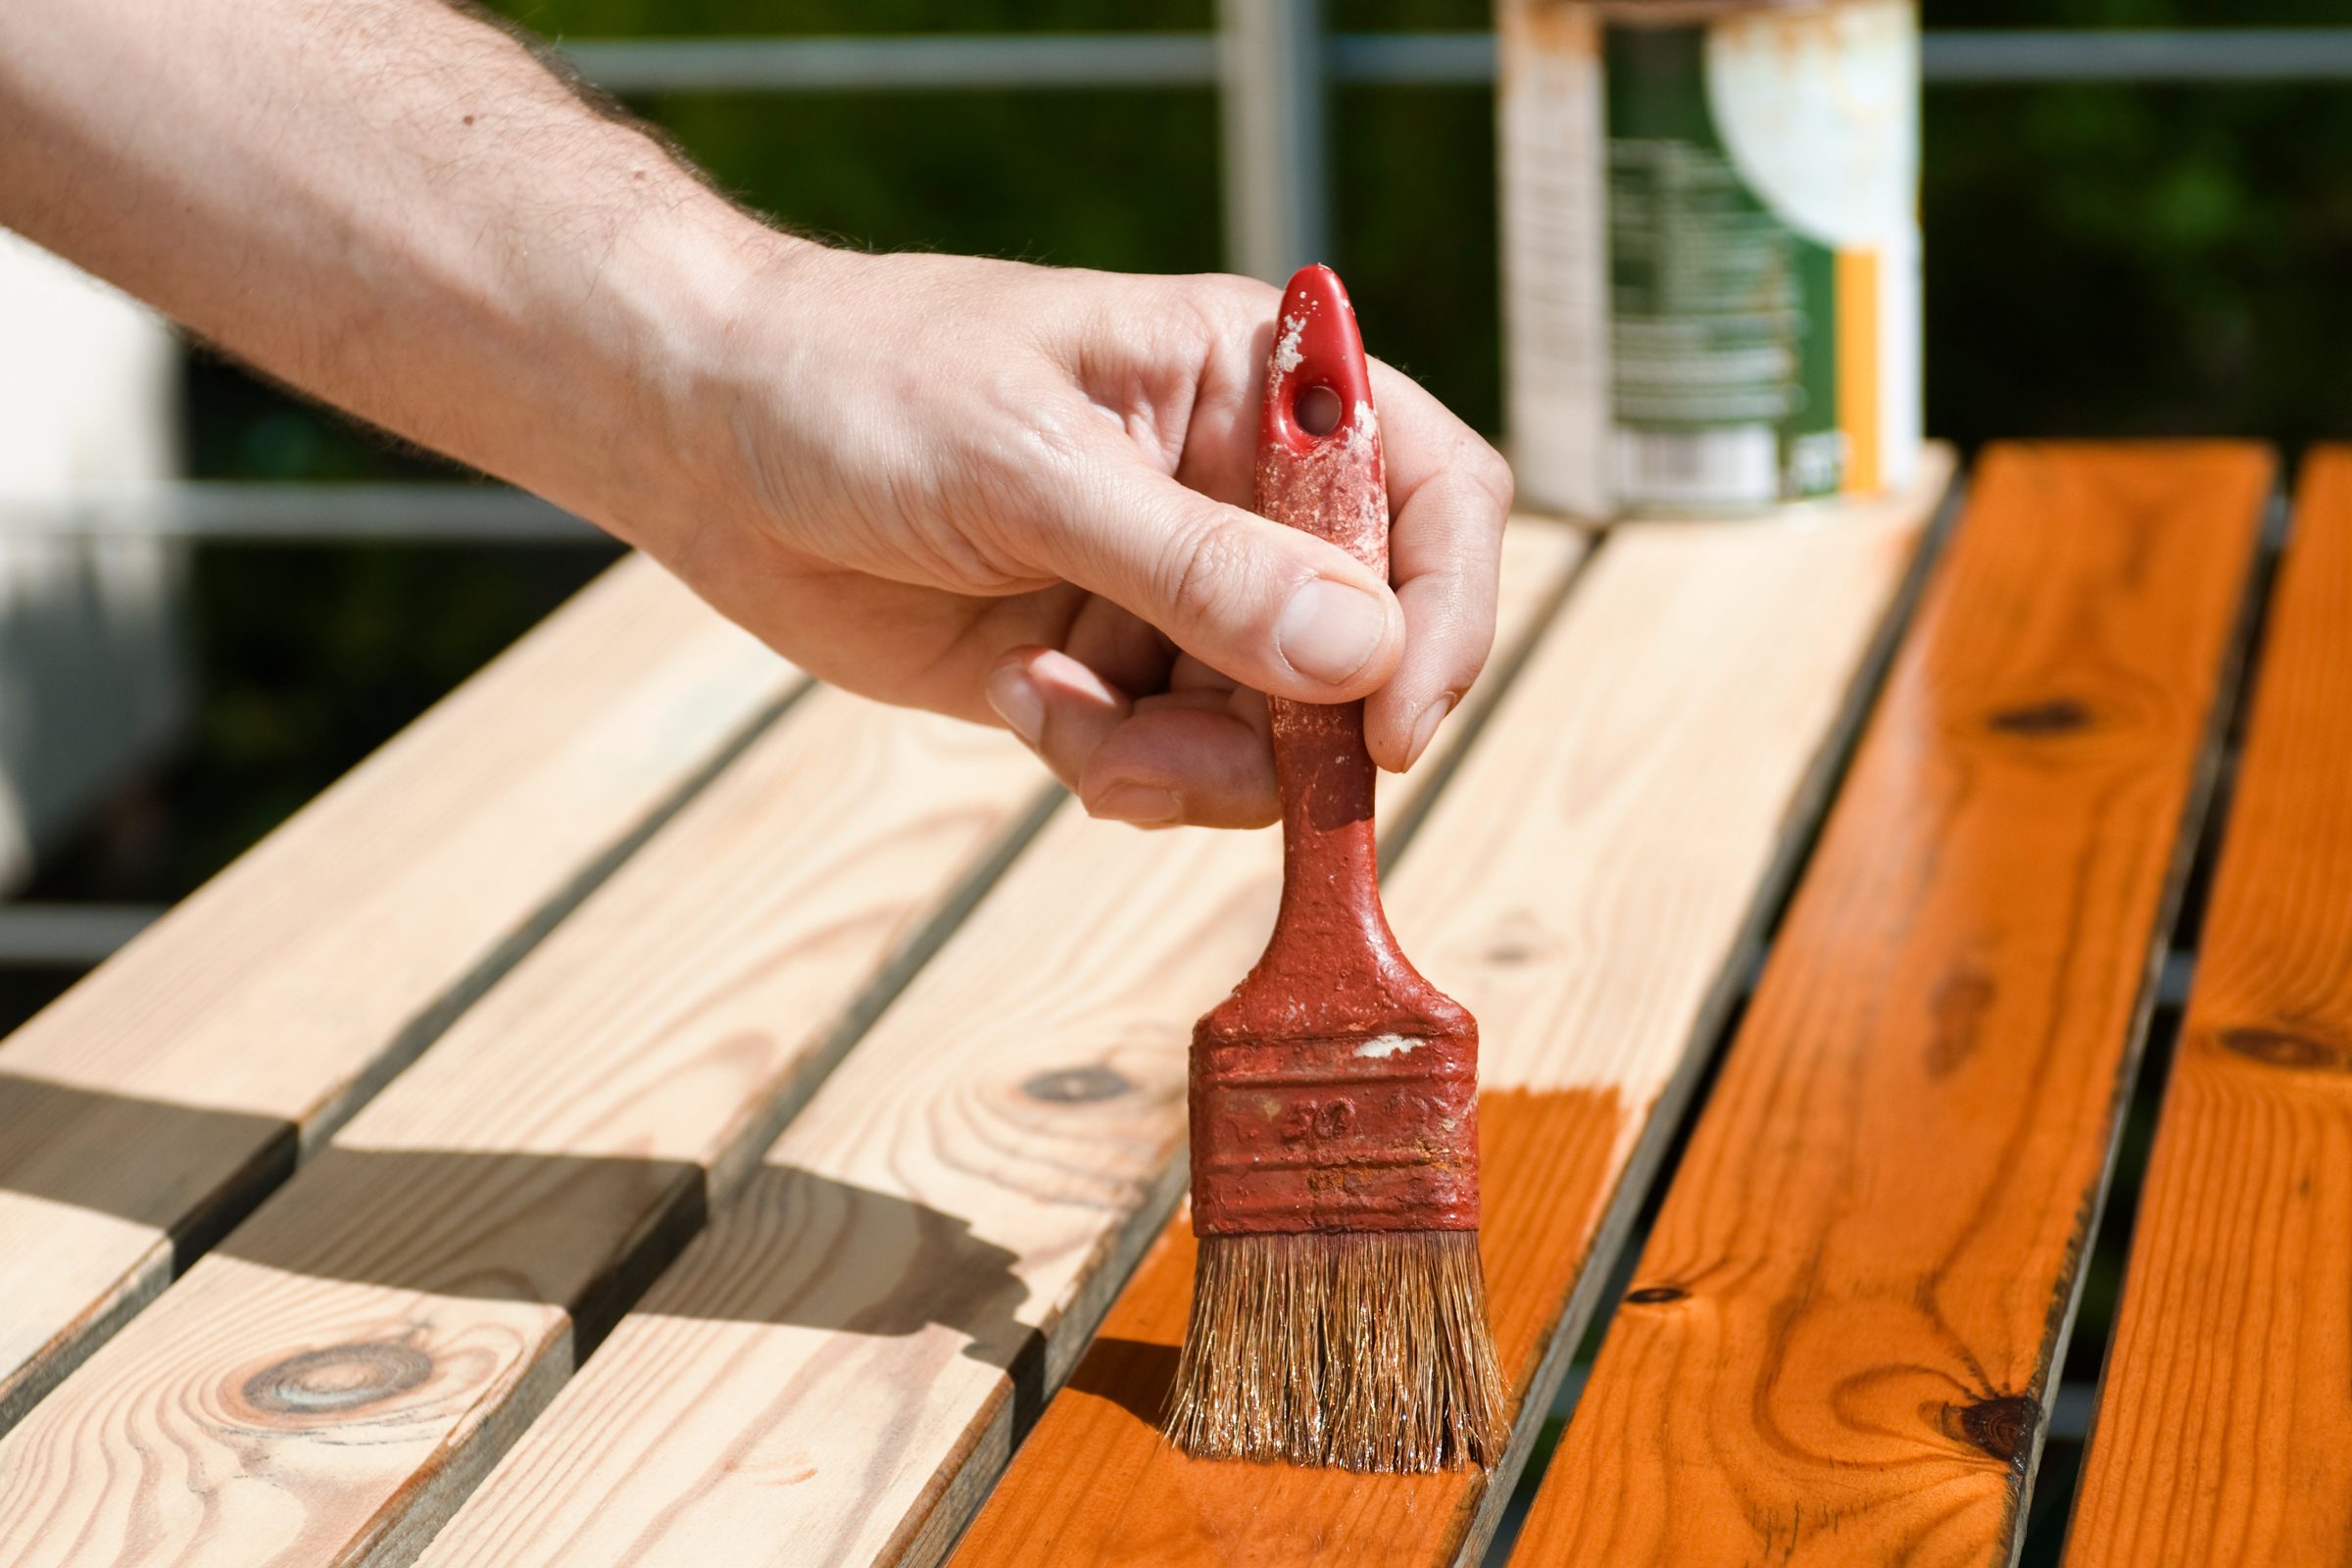 How to stain wood CORRECTLY! Wood staining techniques, tips, and tricks 